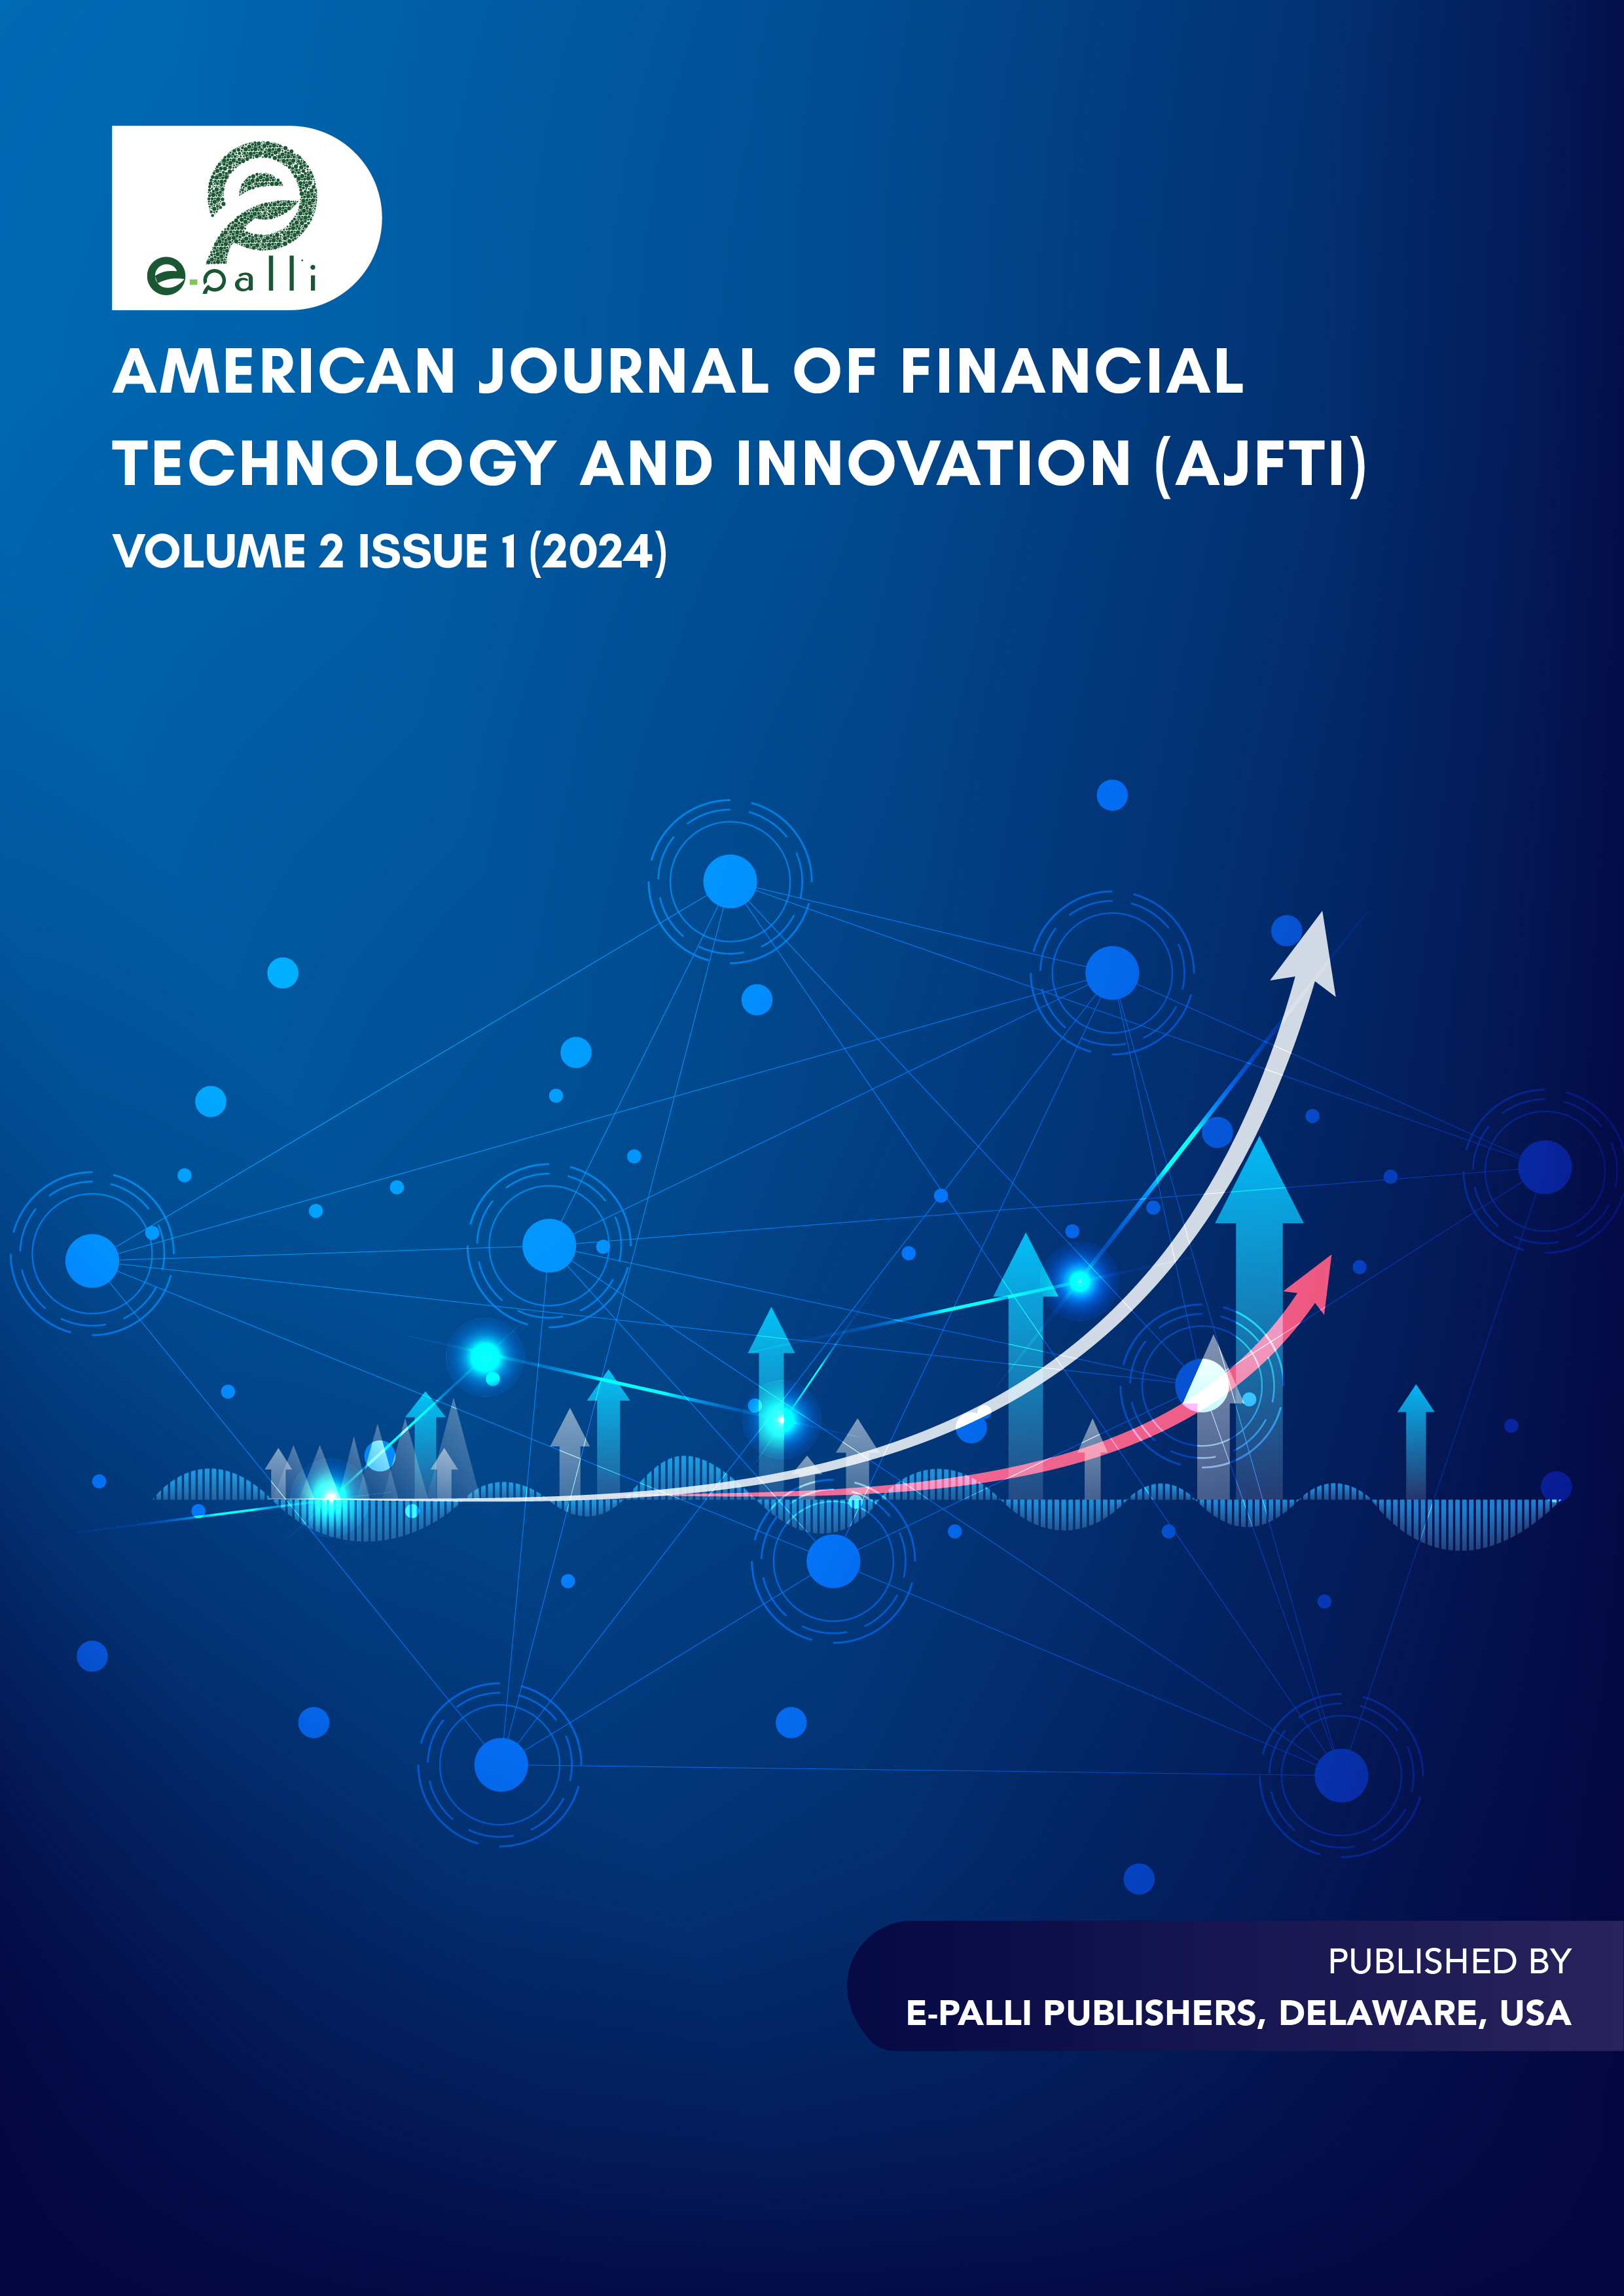                     View Vol. 2 No. 1 (2024): American Journal of Financial Technology and Innovation
                